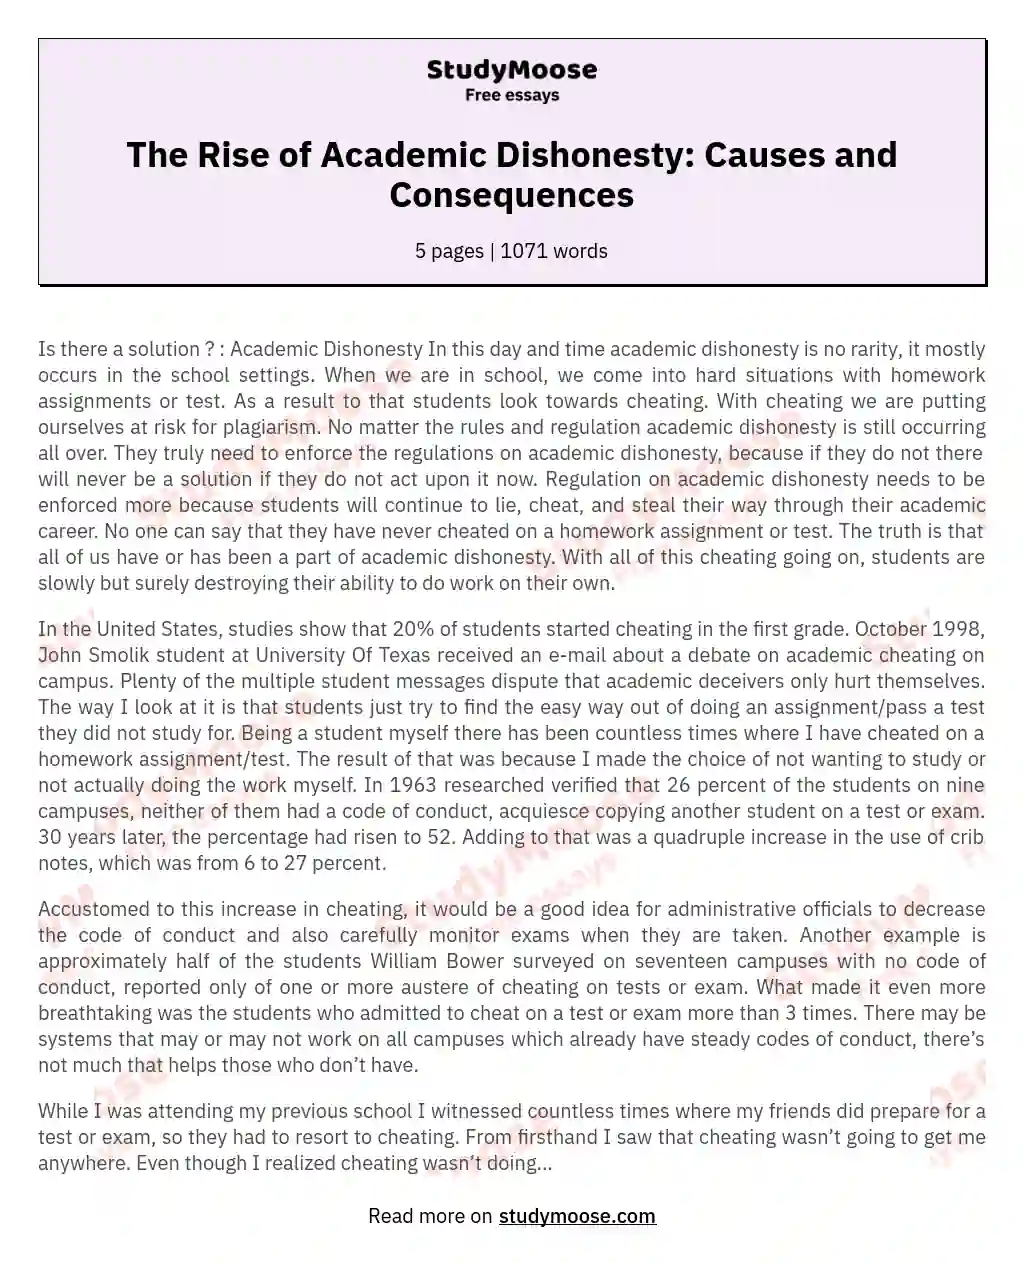 The Rise of Academic Dishonesty: Causes and Consequences essay